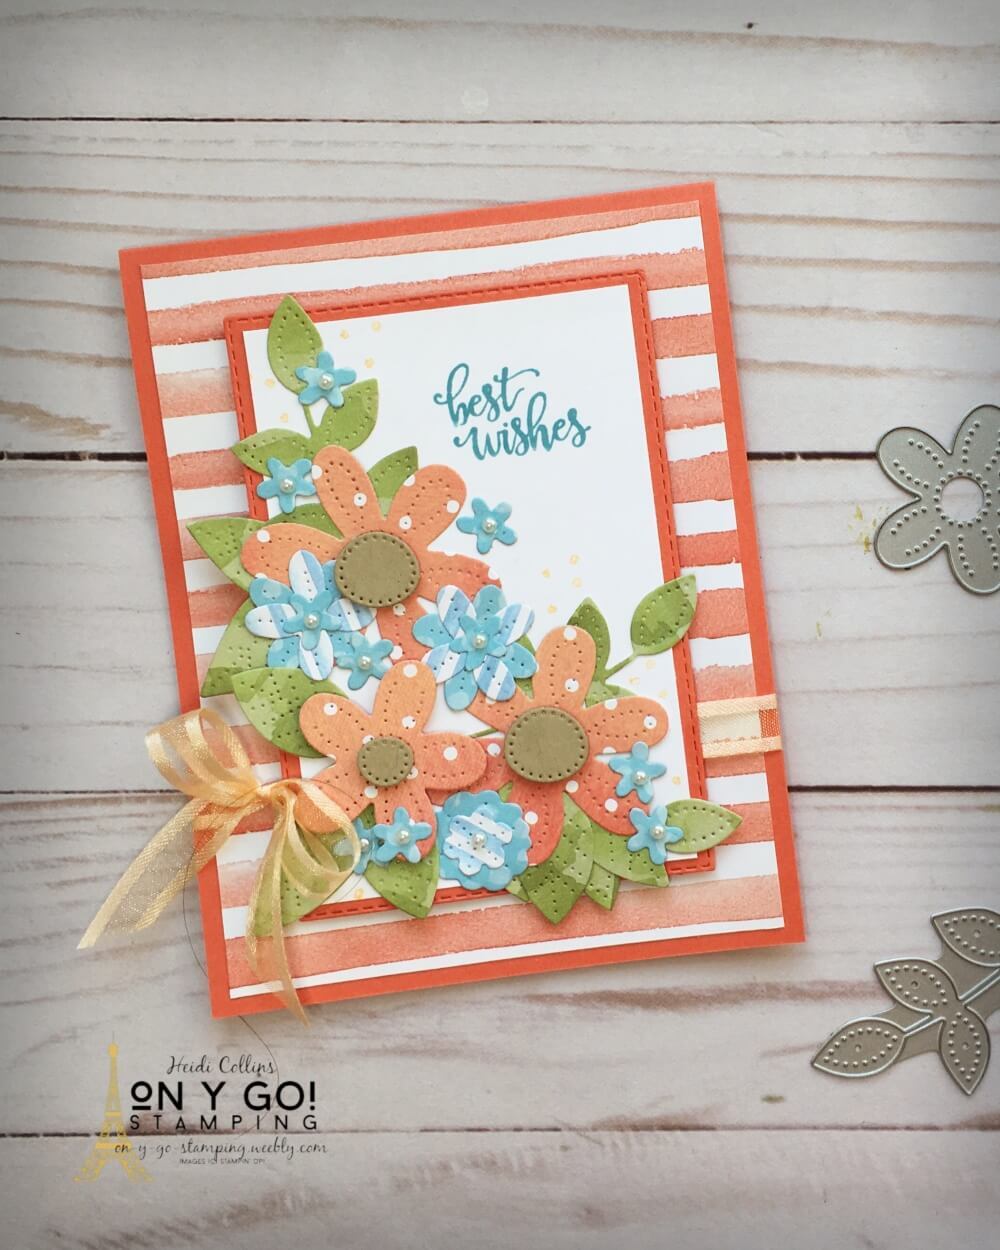 Cut flowers from patterned paper with the Pierced Blooms dies from Stampin' Up! This gorgeous patterned paper is the You're a Peach Designer Series Paper.